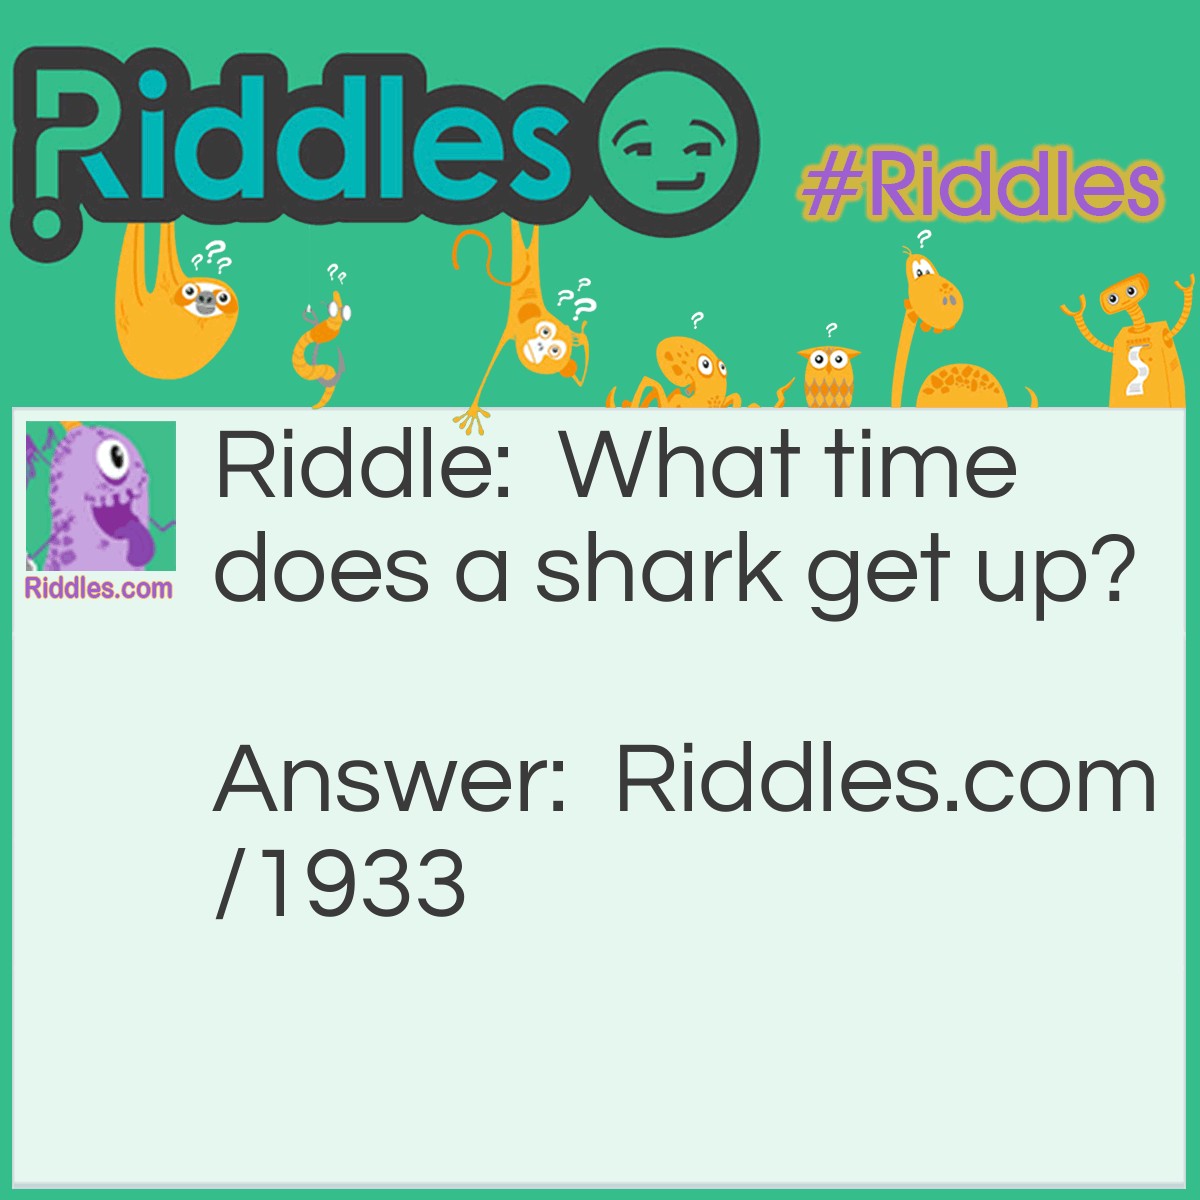 Riddle: What time does a shark get up? Answer: Ate o'clock.